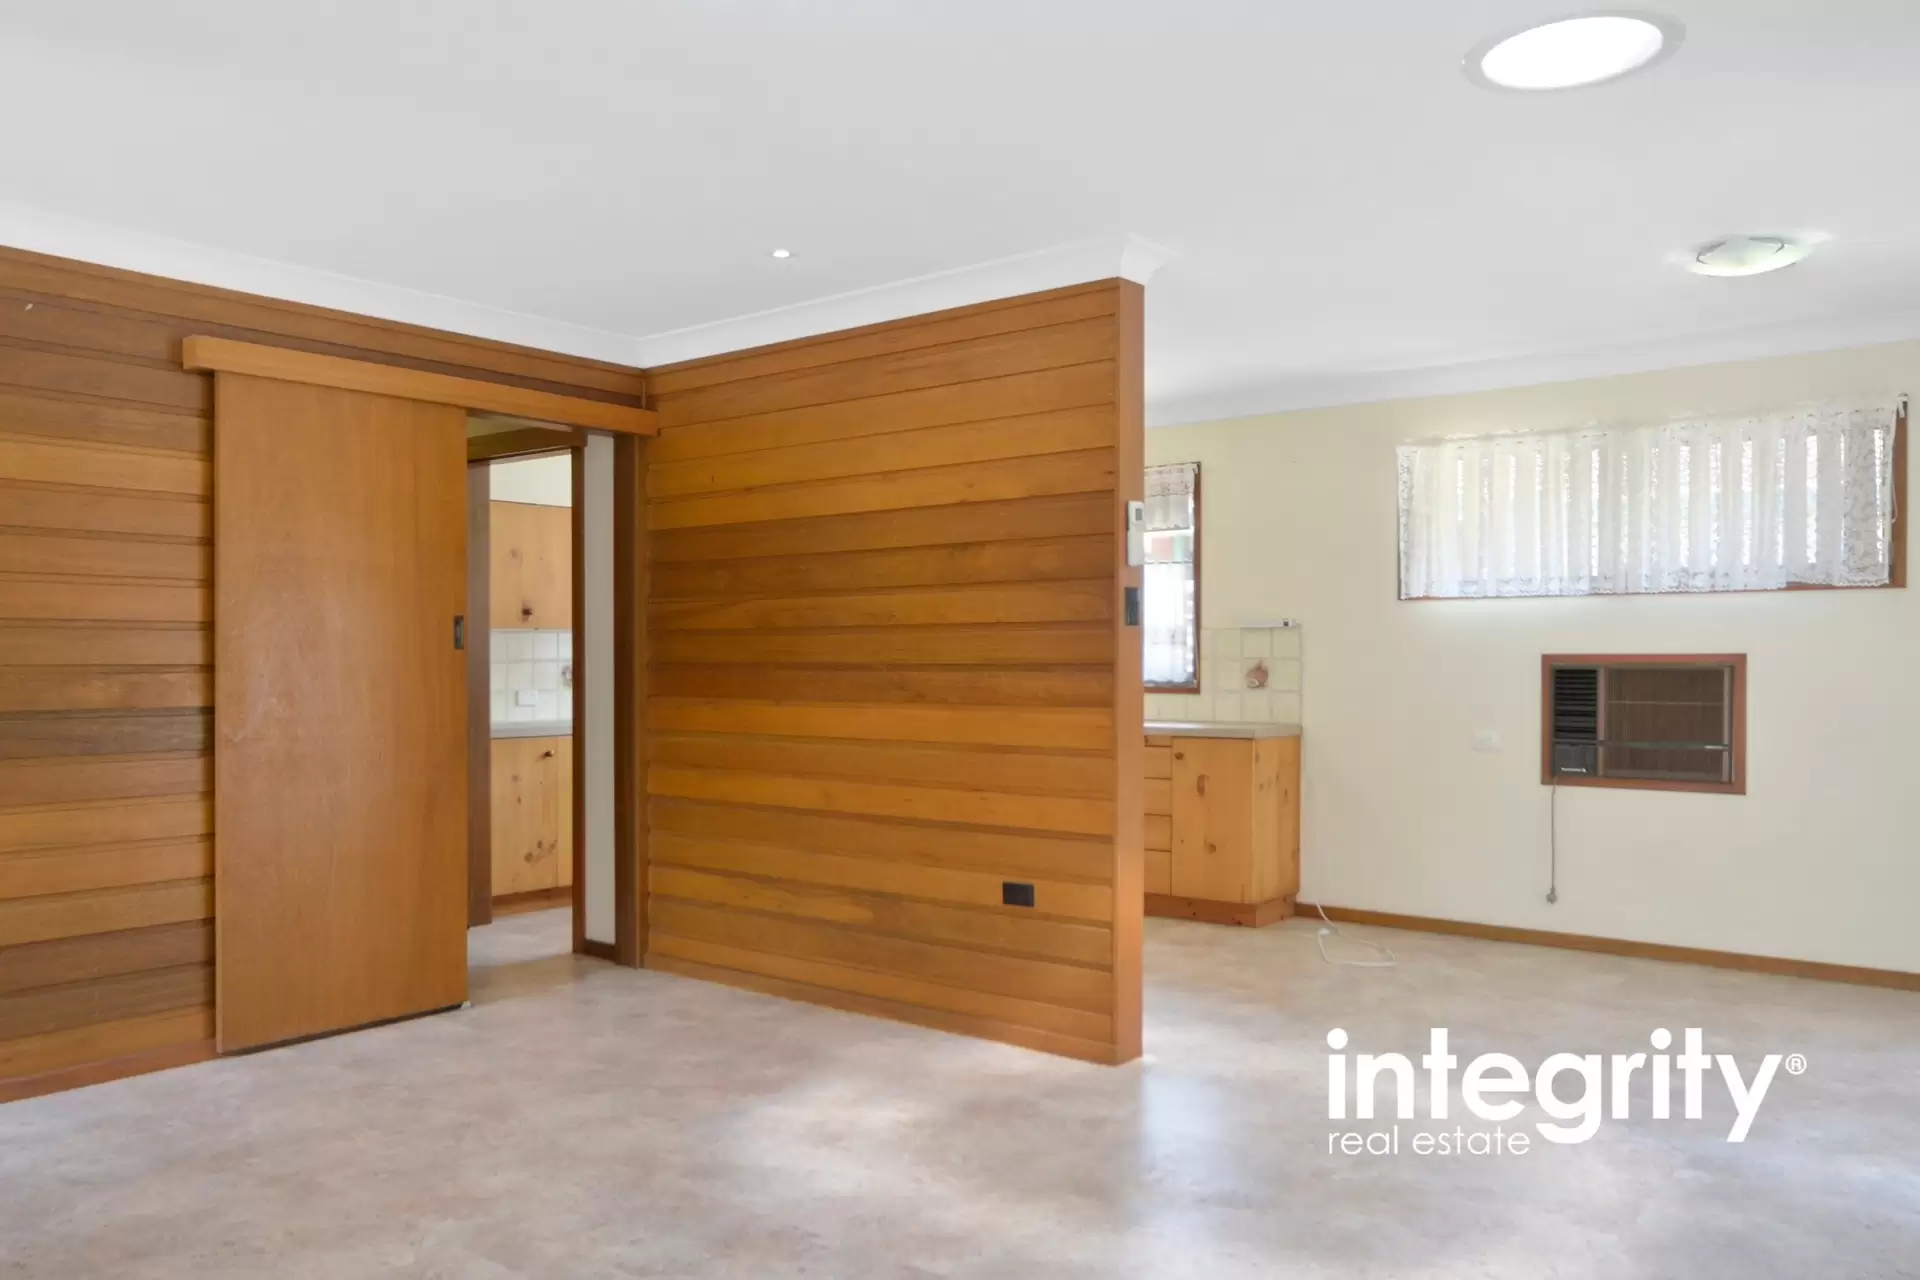 3/52 Tarawal Street, Bomaderry Sold by Integrity Real Estate - image 2